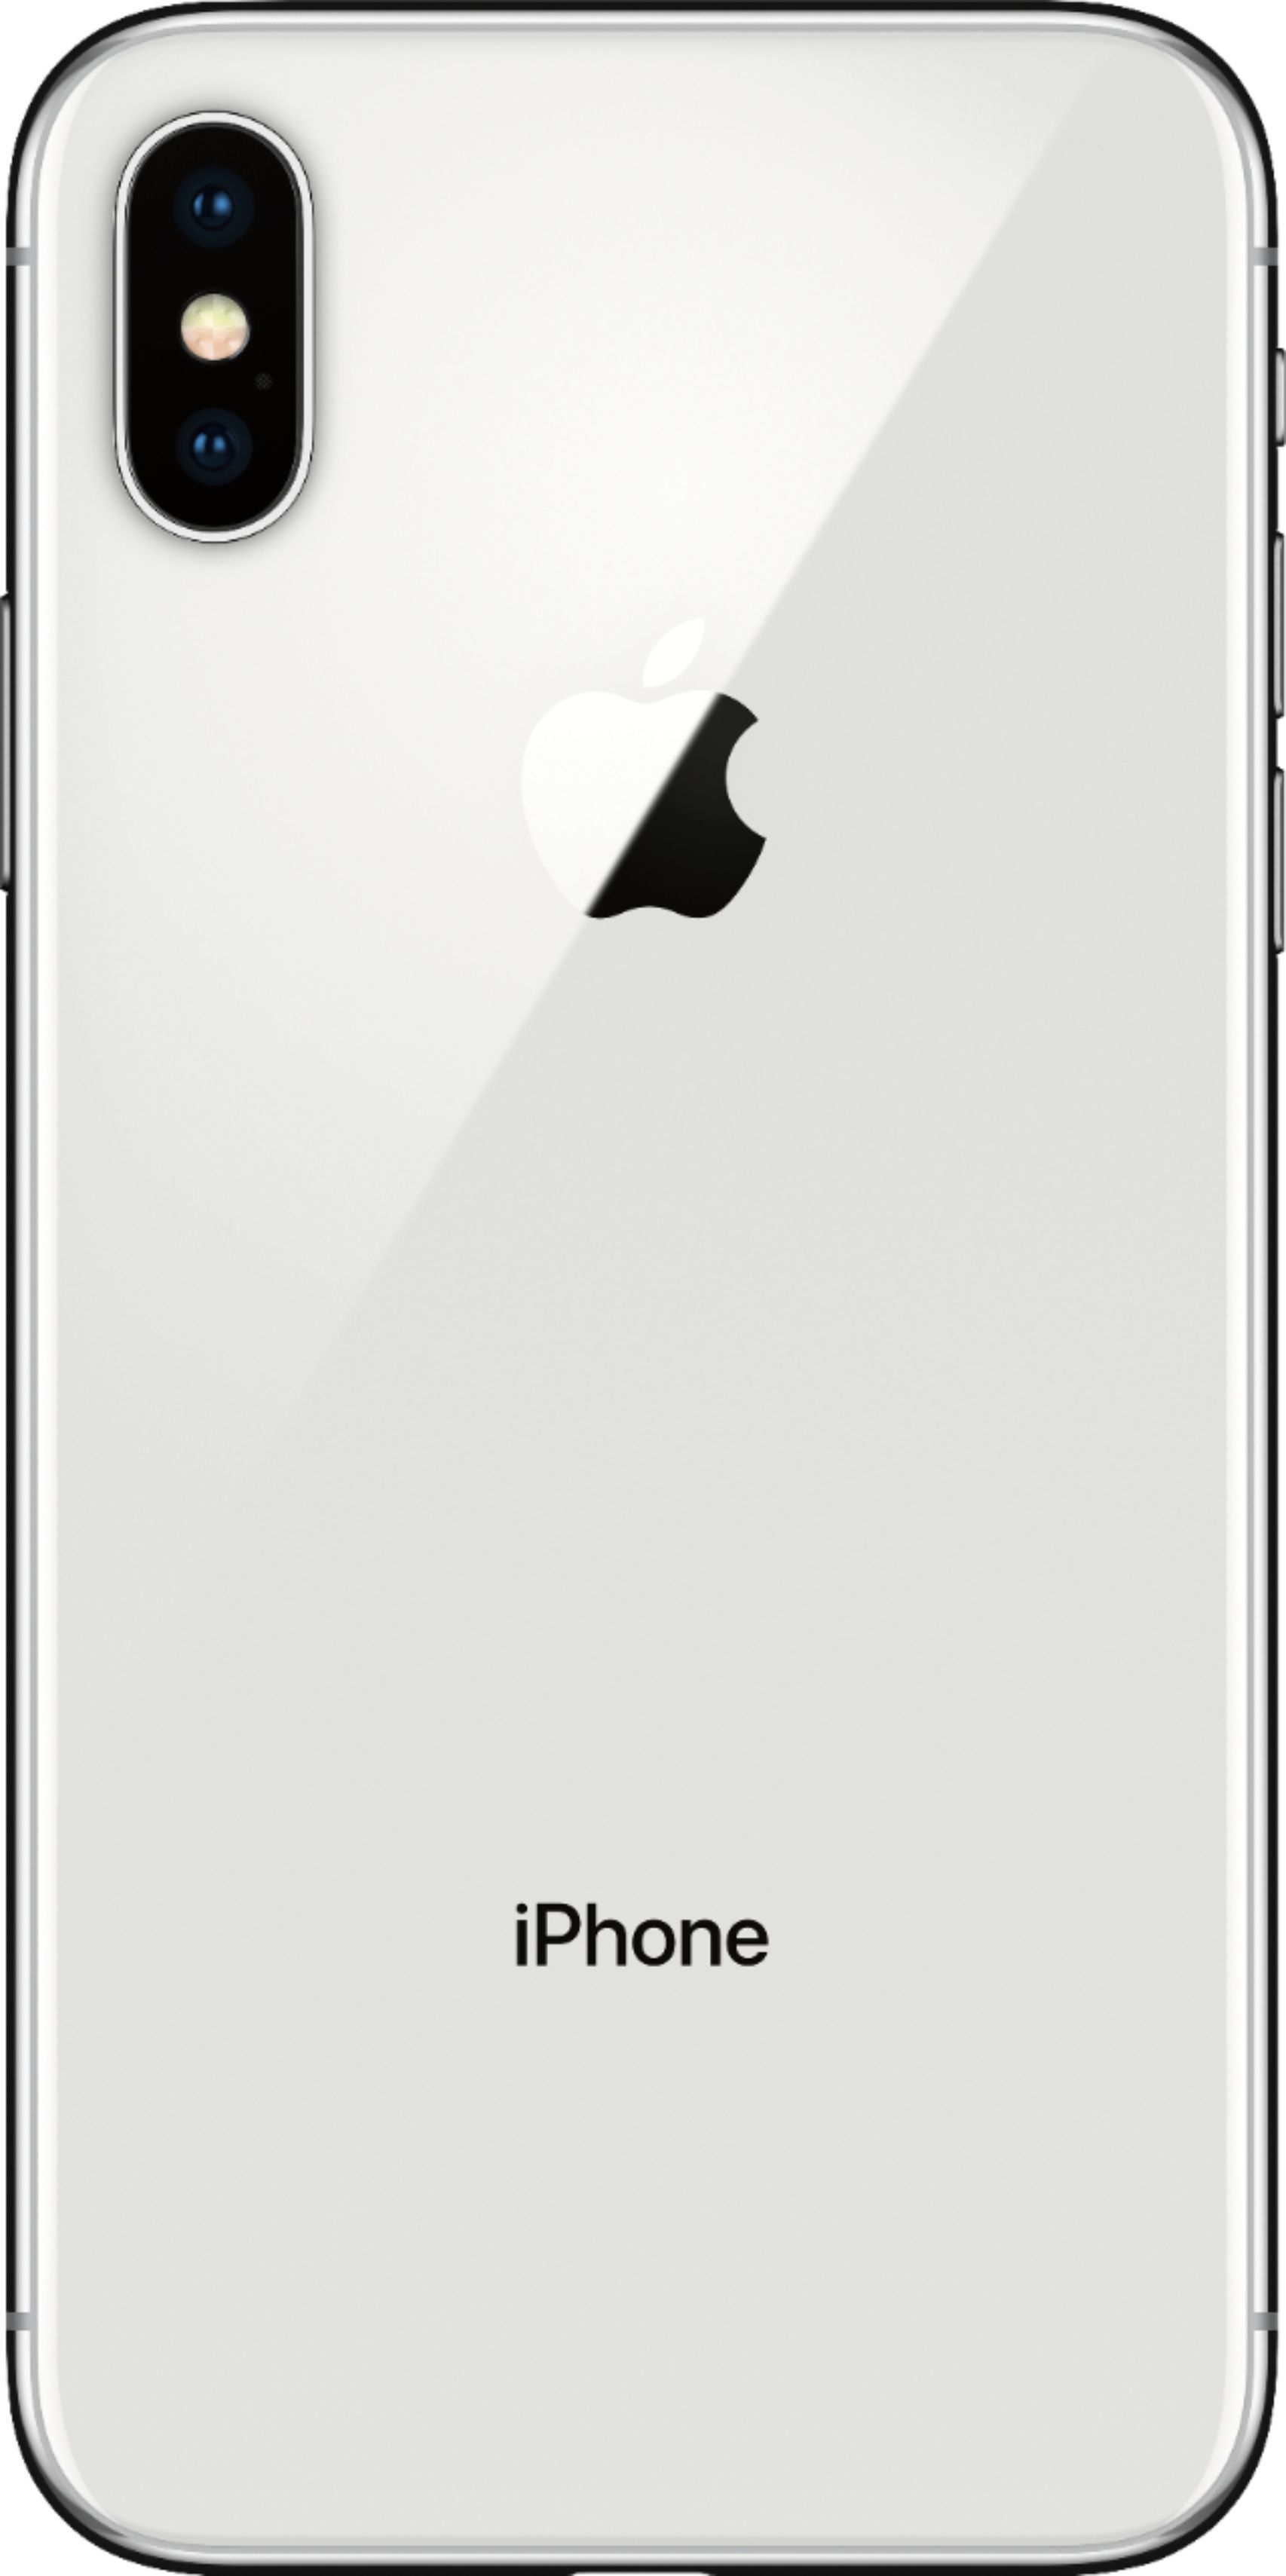 iPhone X 256GB silver | myglobaltax.com